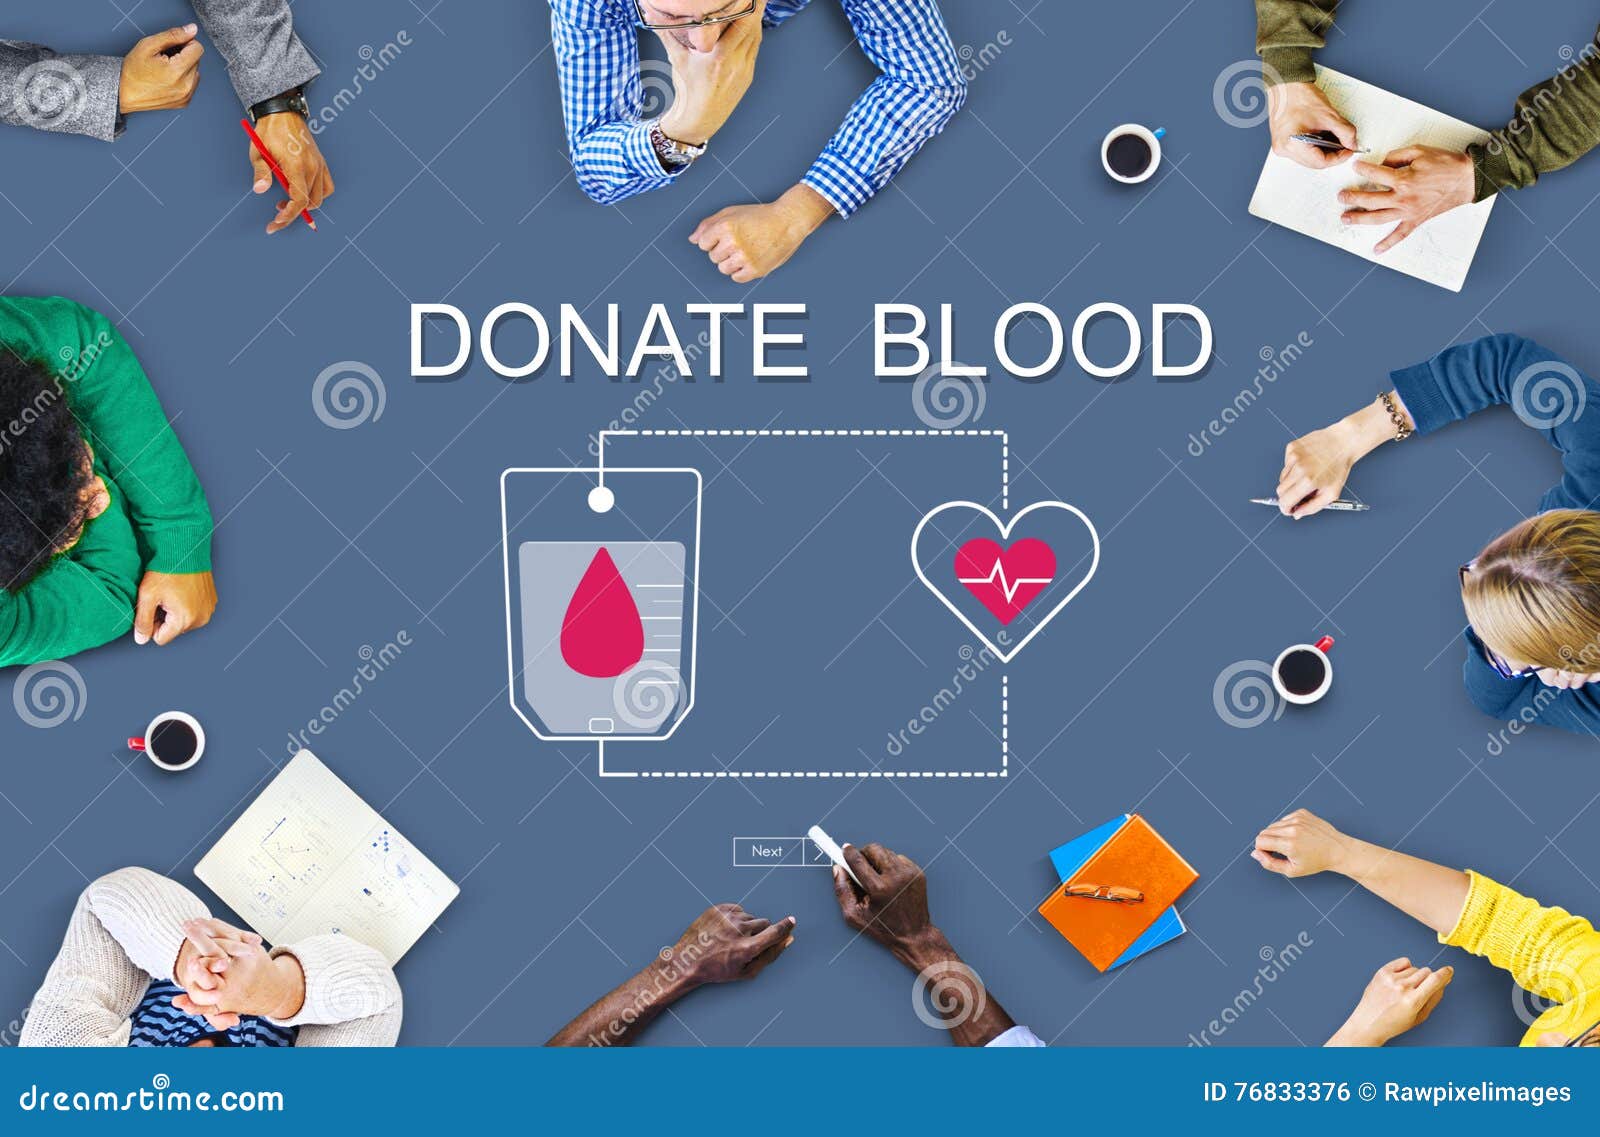 blood donation give life transfusion concept